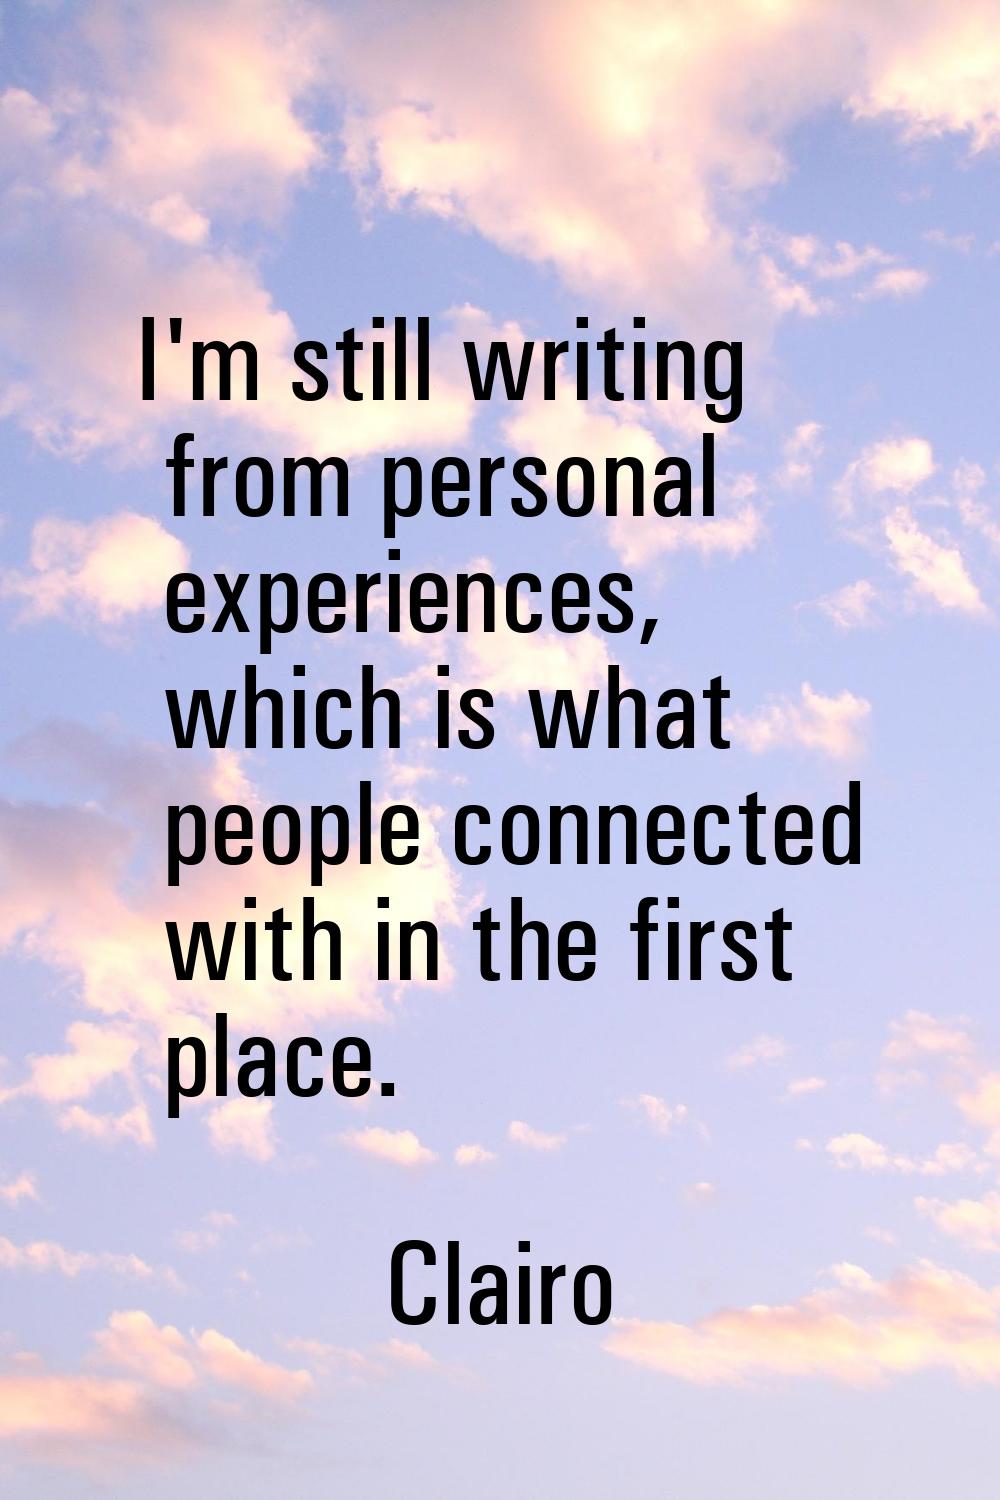 I'm still writing from personal experiences, which is what people connected with in the first place